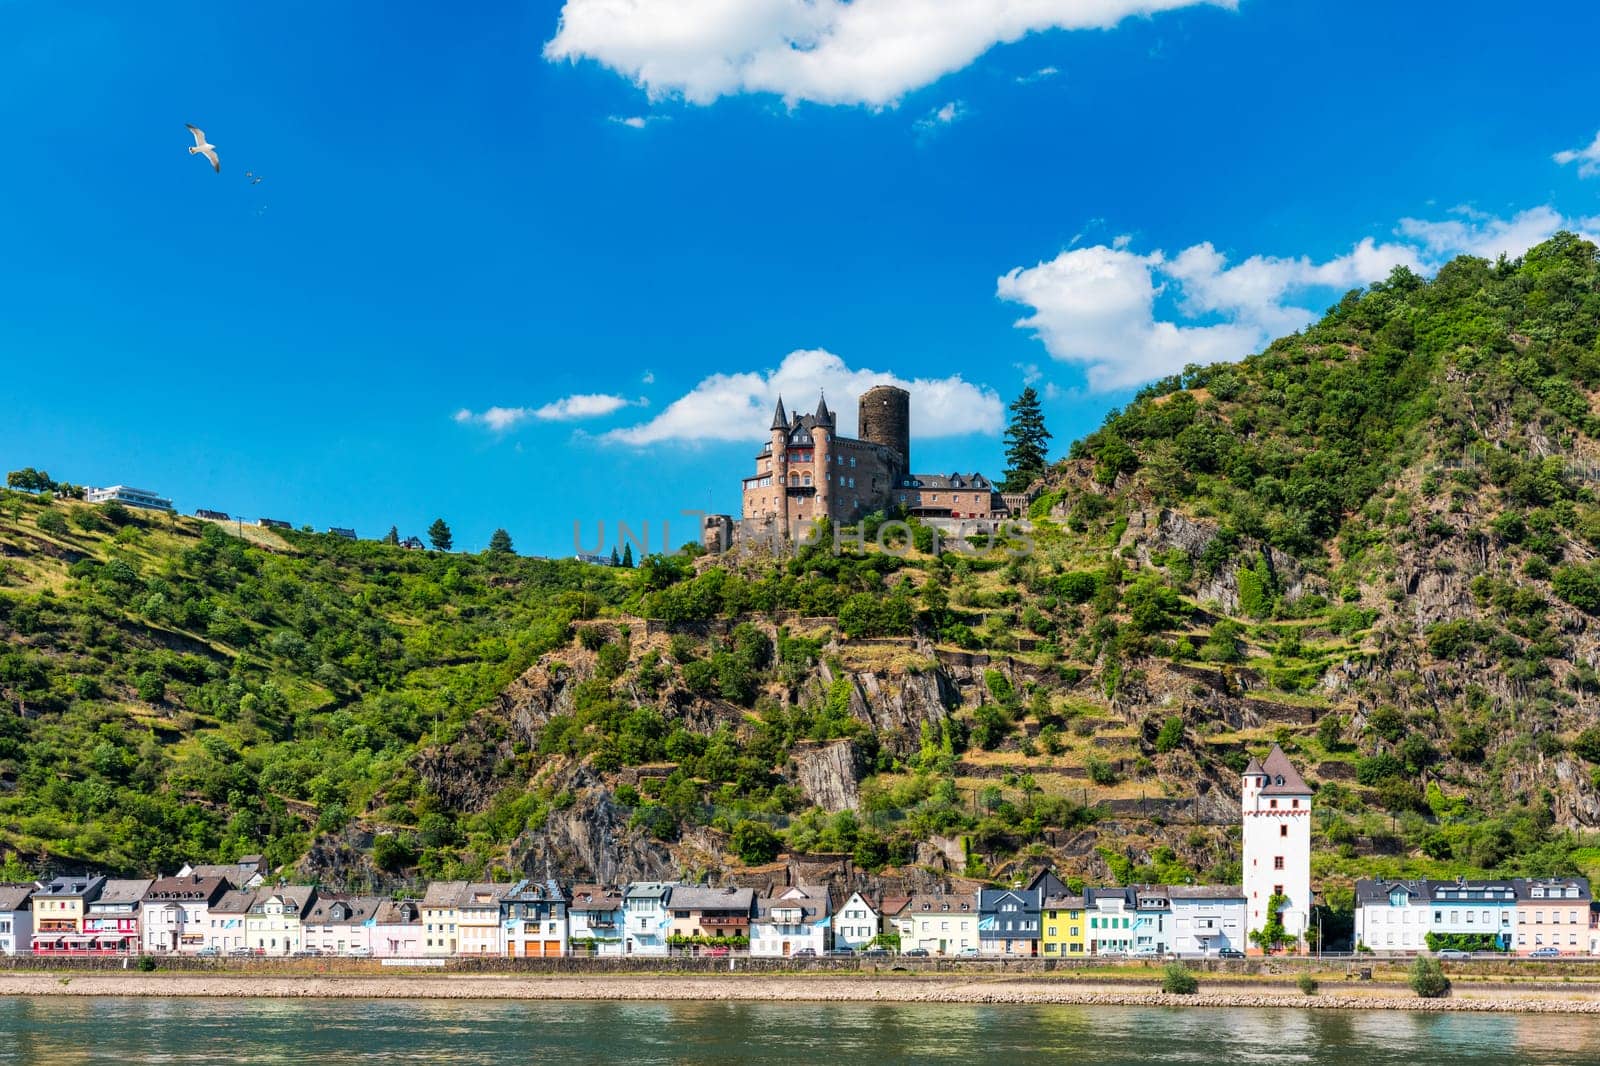 Bacharach panoramic view. Bacharach is a small town in Rhine valley in Rhineland-Palatinate, Germany. Bacharach is a small town in Rhine valley in Rhineland-Palatinate, Germany by DaLiu